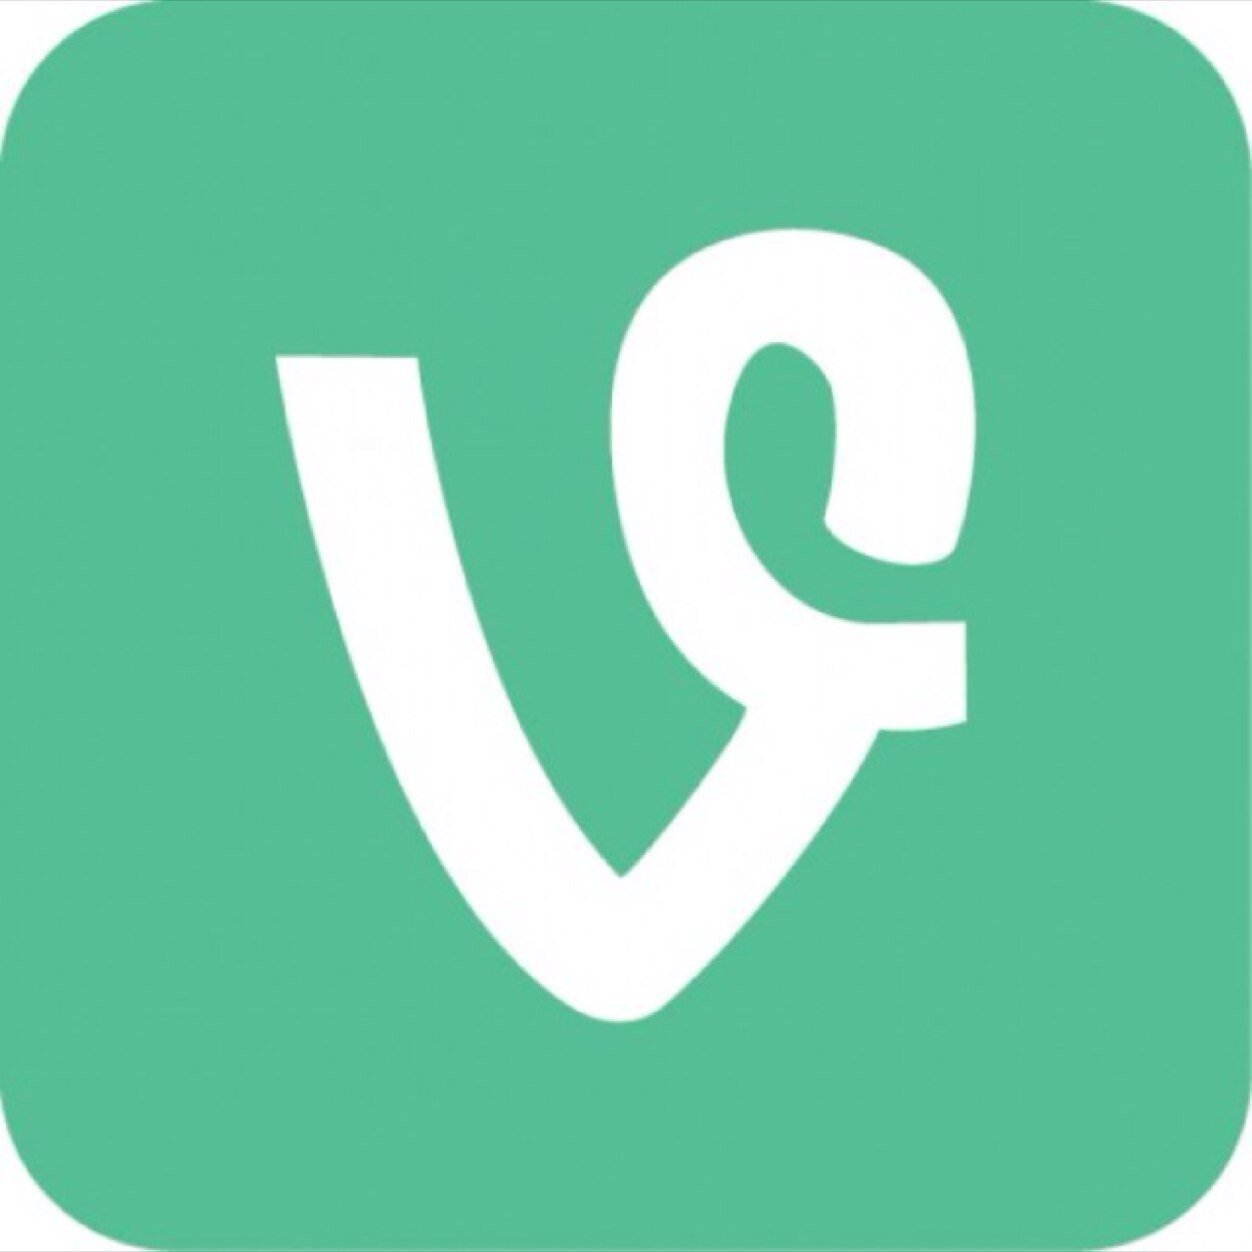 Compilation of the best Vines on the internet. We don't own these clips, we just laugh at them.